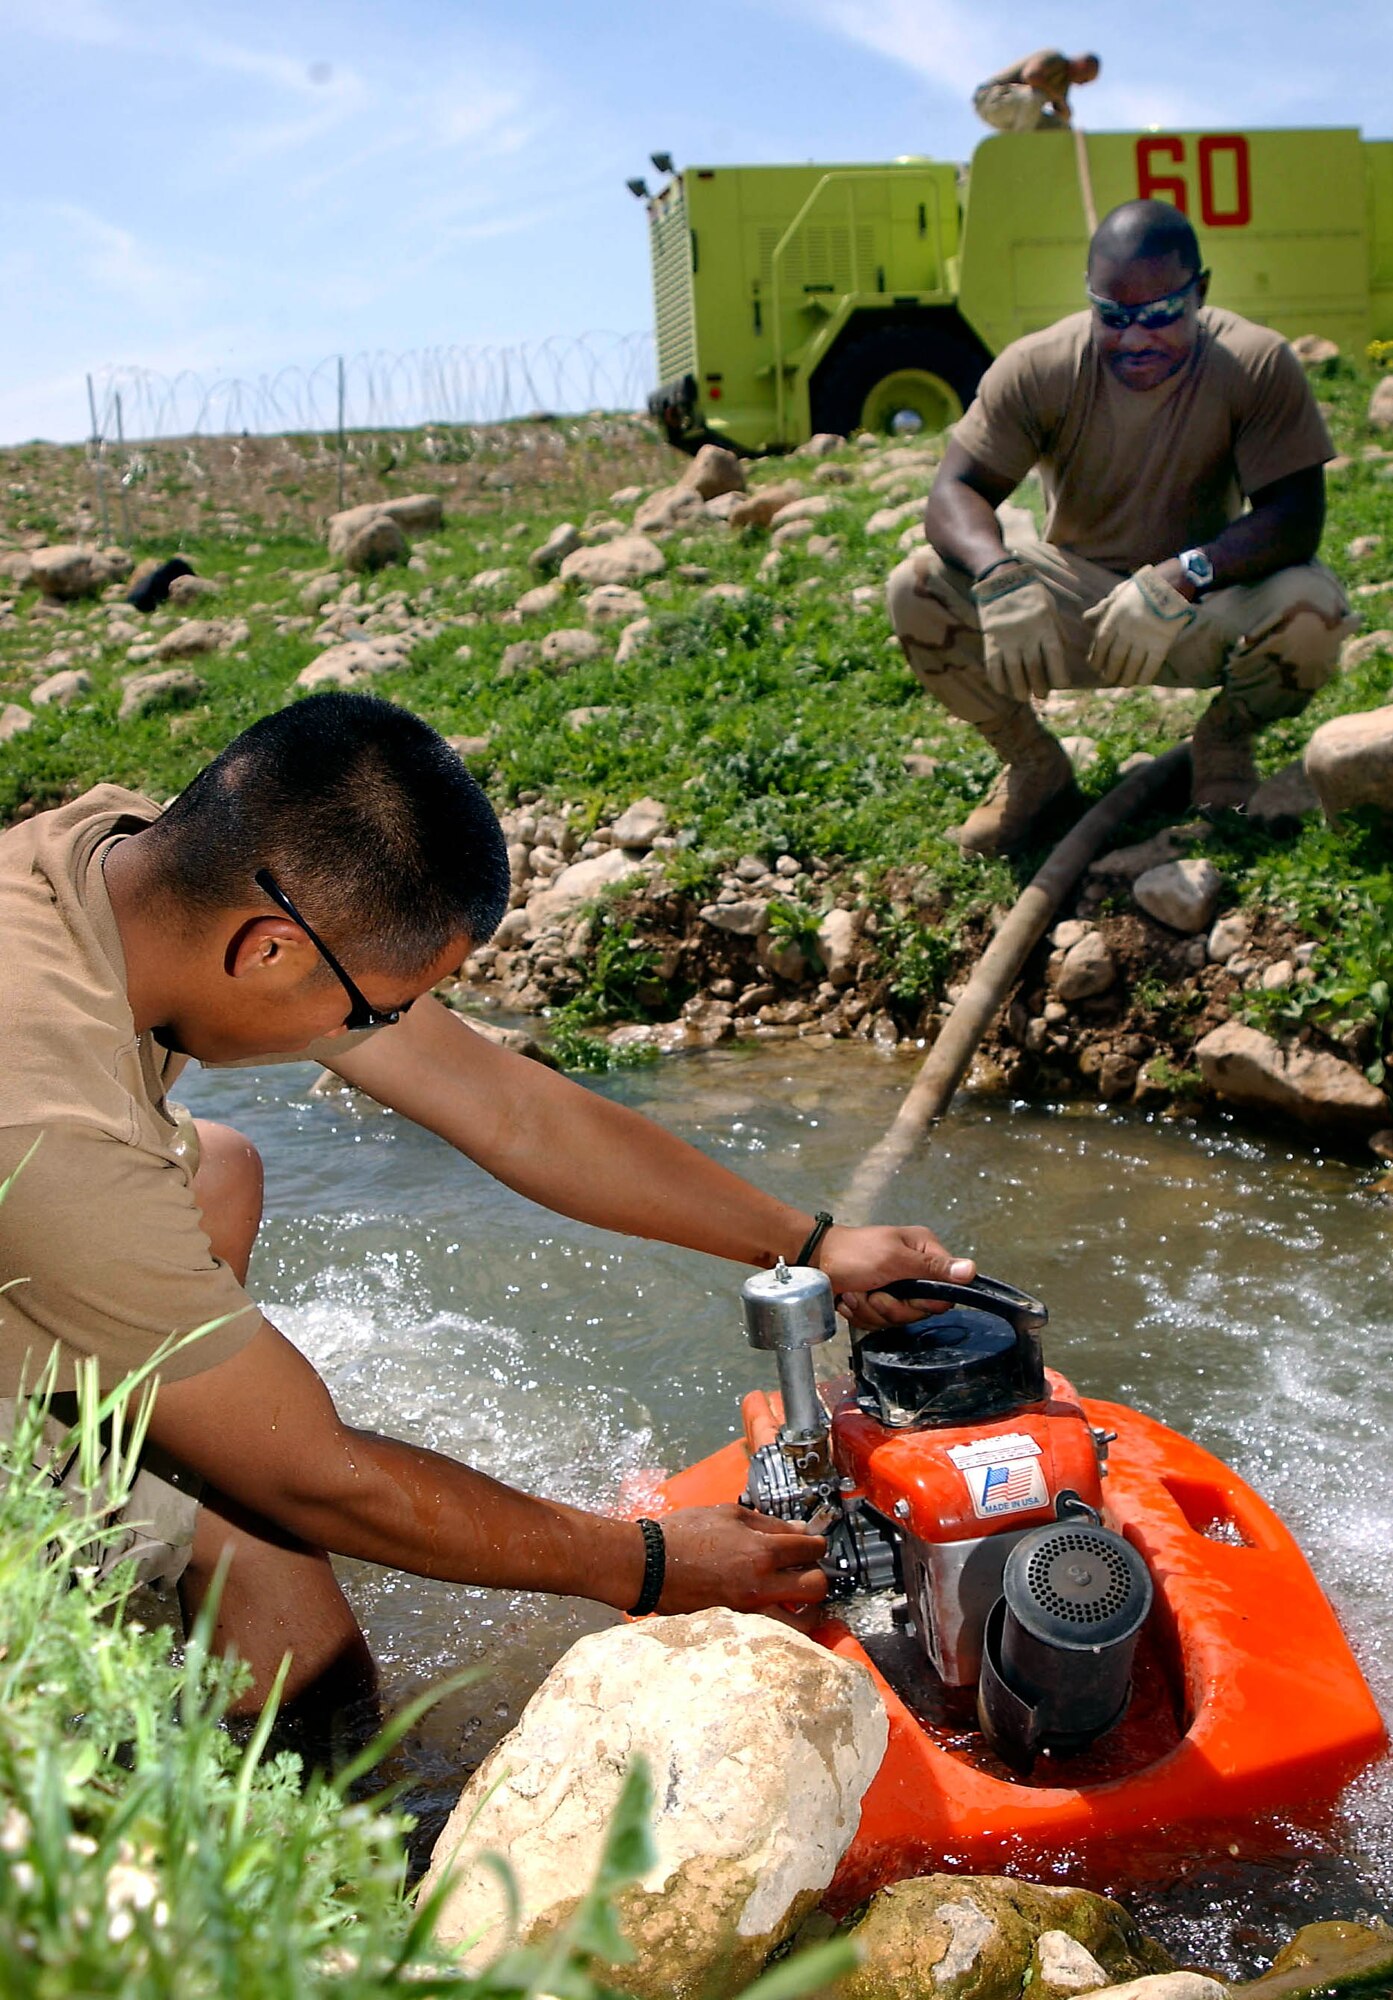 OPERATION IRAQI FREEDOM -- Airman 1st Class Brandon Olsen (left) and Senior Airman Dwight Moses pump water  from a stream near Bashur Airfield, Iraq, to fill their P-19 fire truck.  The firefighters are from a host of bases, but attached to the 86th Expeditionary Contingency Response Group.  They make several trips a week to the stream to get water for the airfield.  (U.S. Air Force photo by Master Sgt. Keith Reed) 